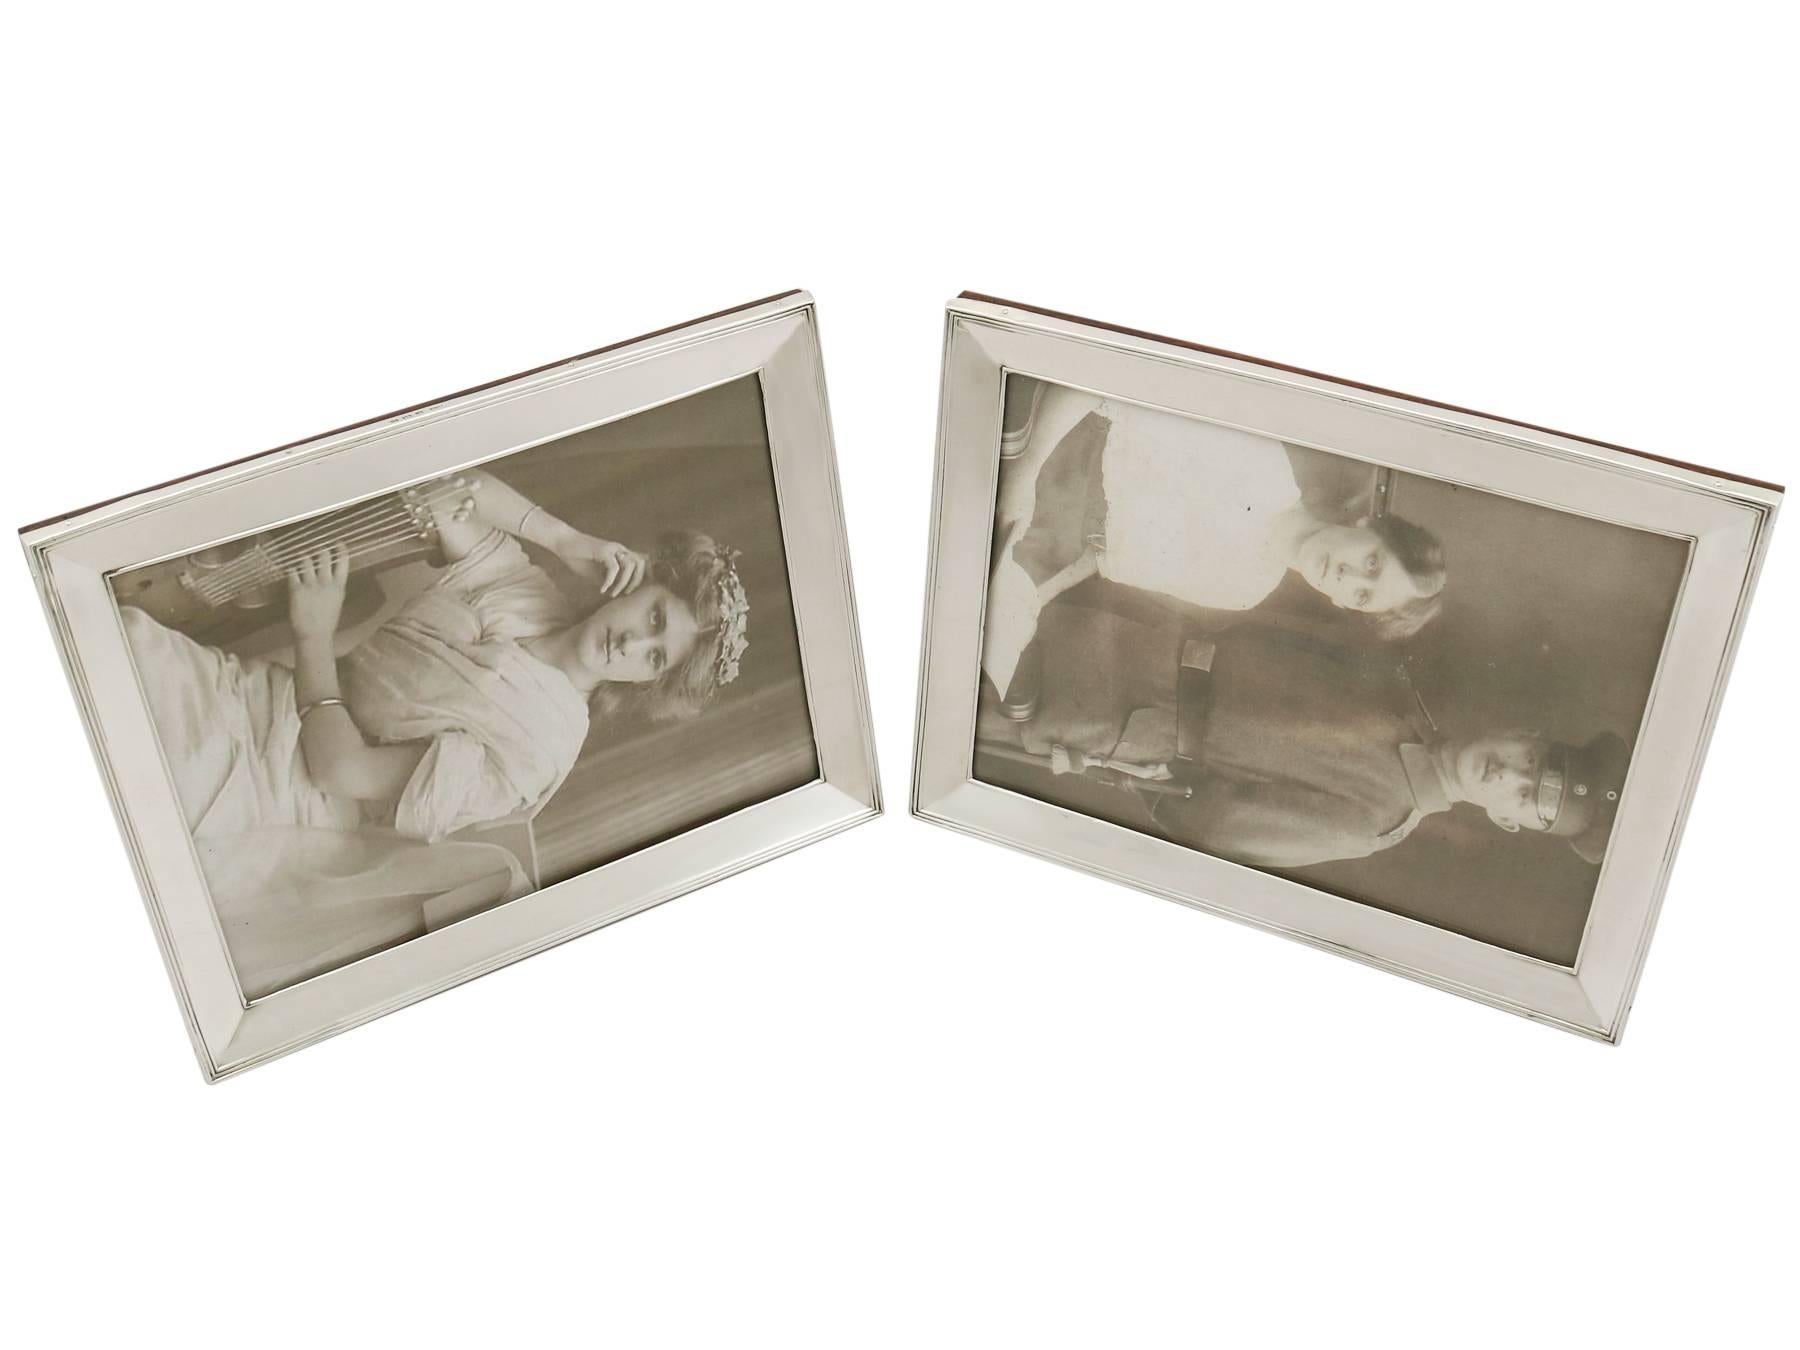 A fine and impressive pair of antique George V English sterling silver photograph frames; an addition to our ornamental silverware collection.

These fine antique George V English sterling silver photograph frames have a plain rectangular form.

The